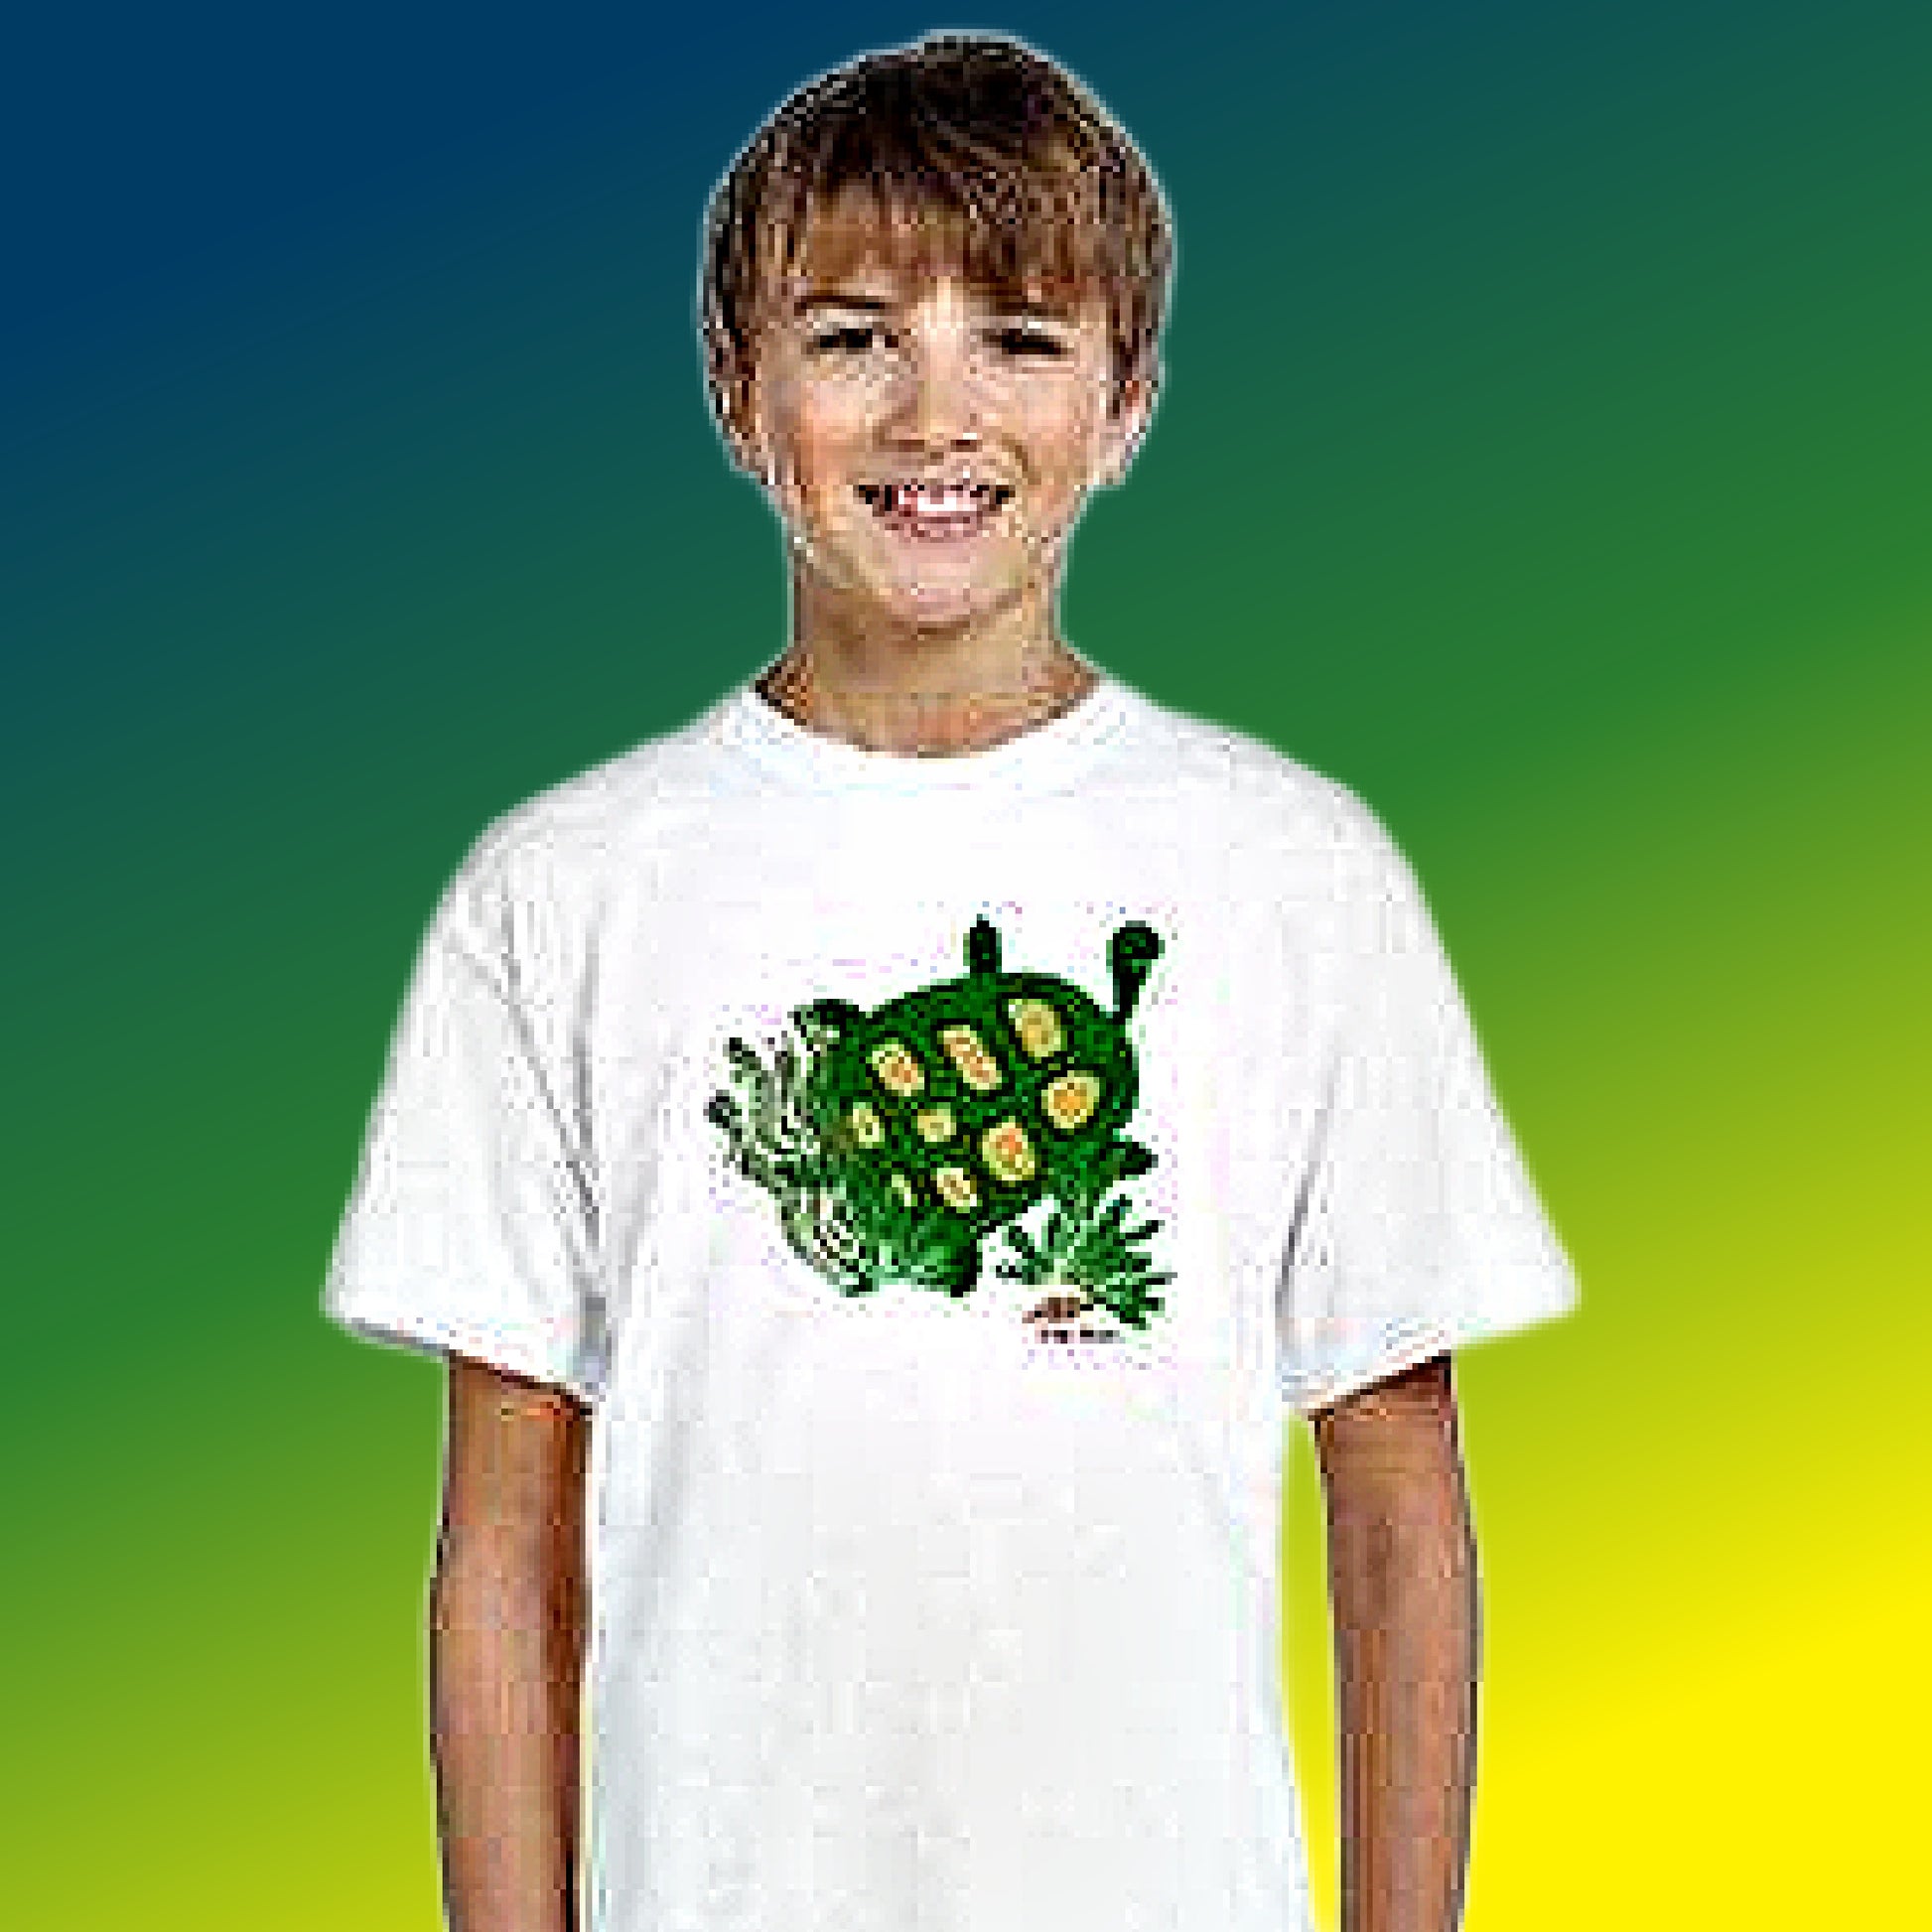 Mock up of a boy wearing this white t-shirt